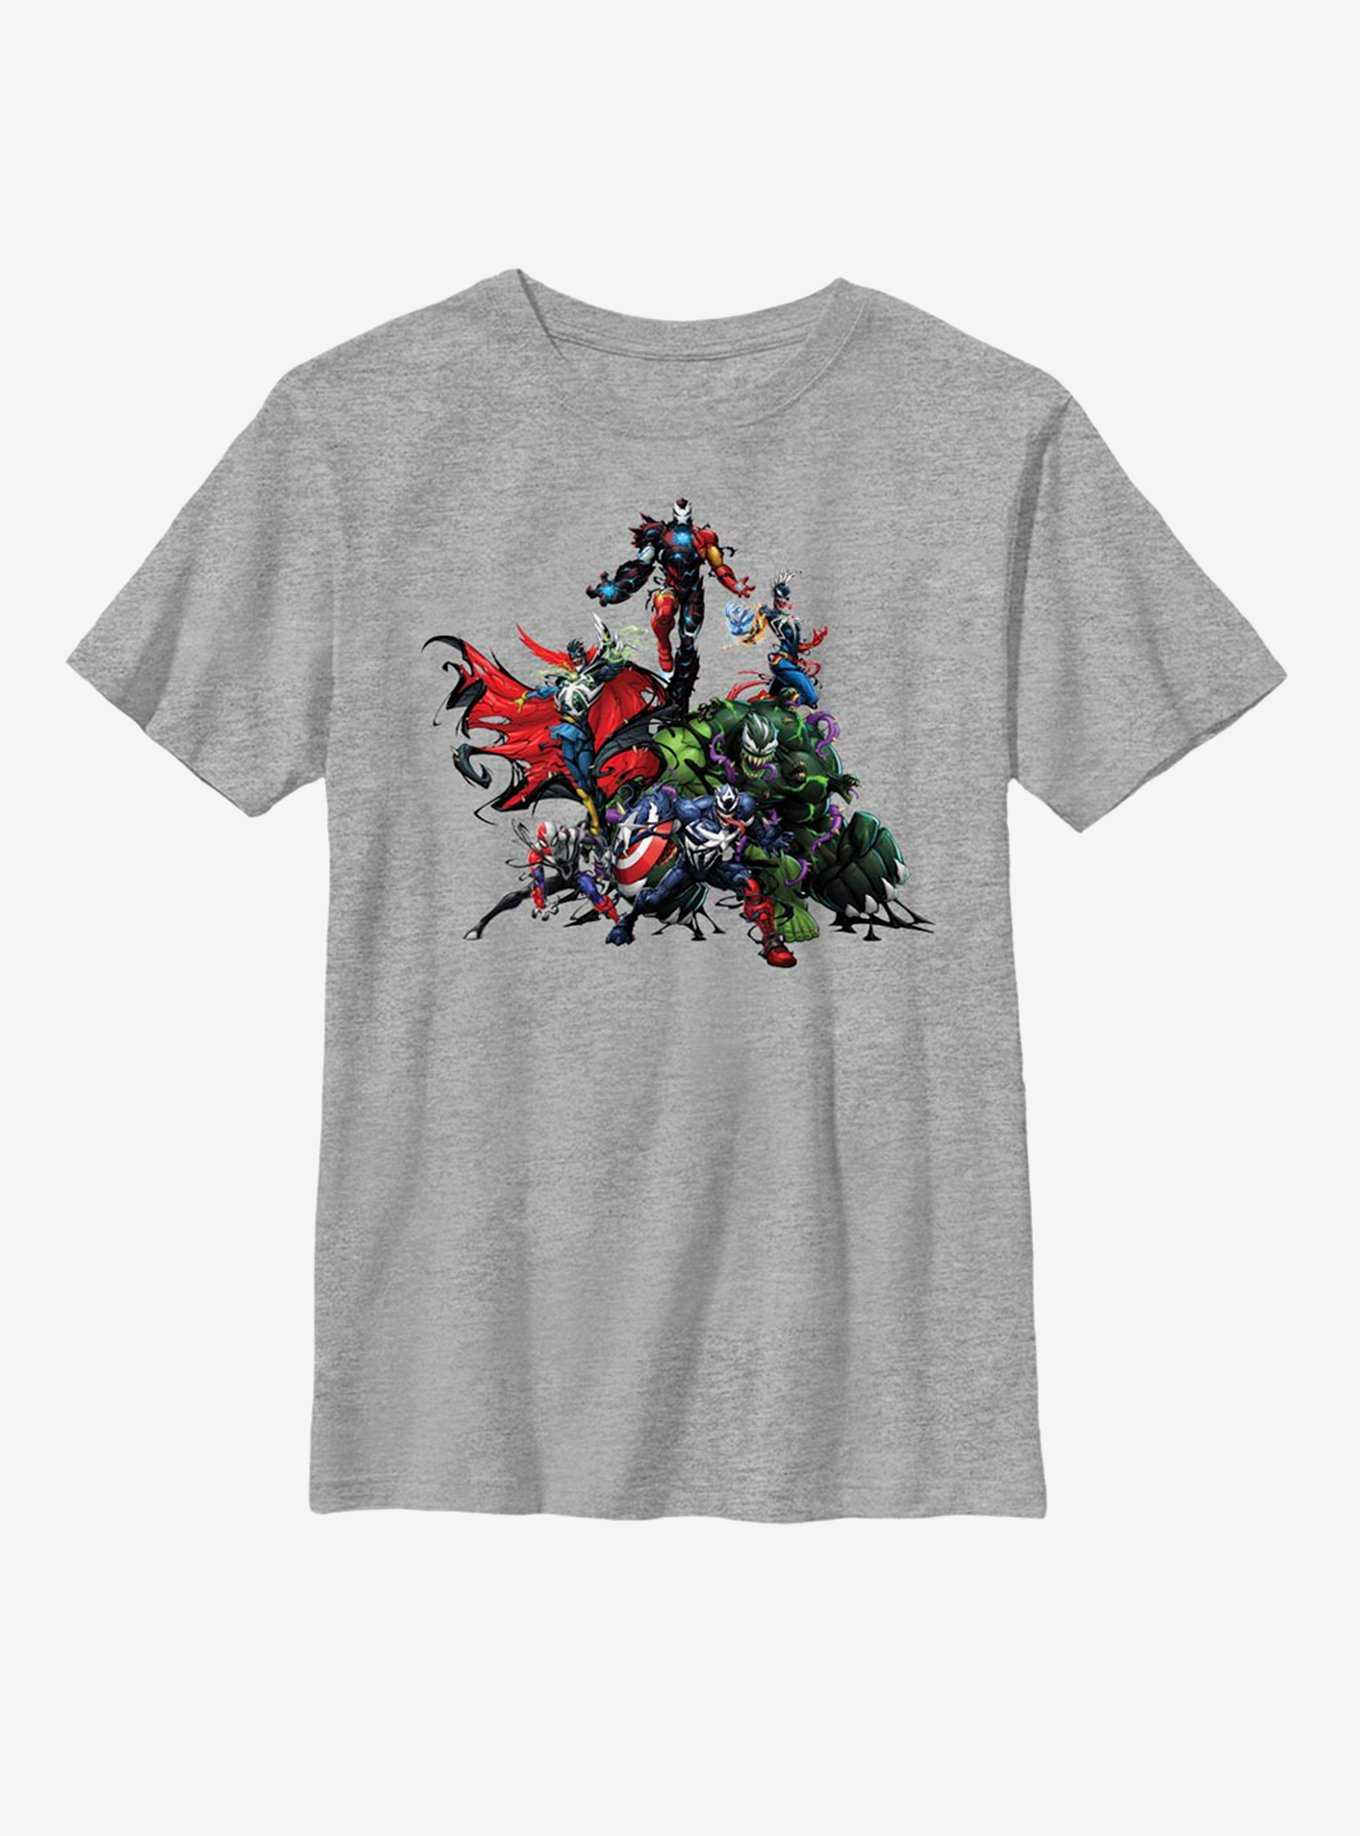 Marvel Avengers Venomized Takeover Youth T-Shirt, , hi-res